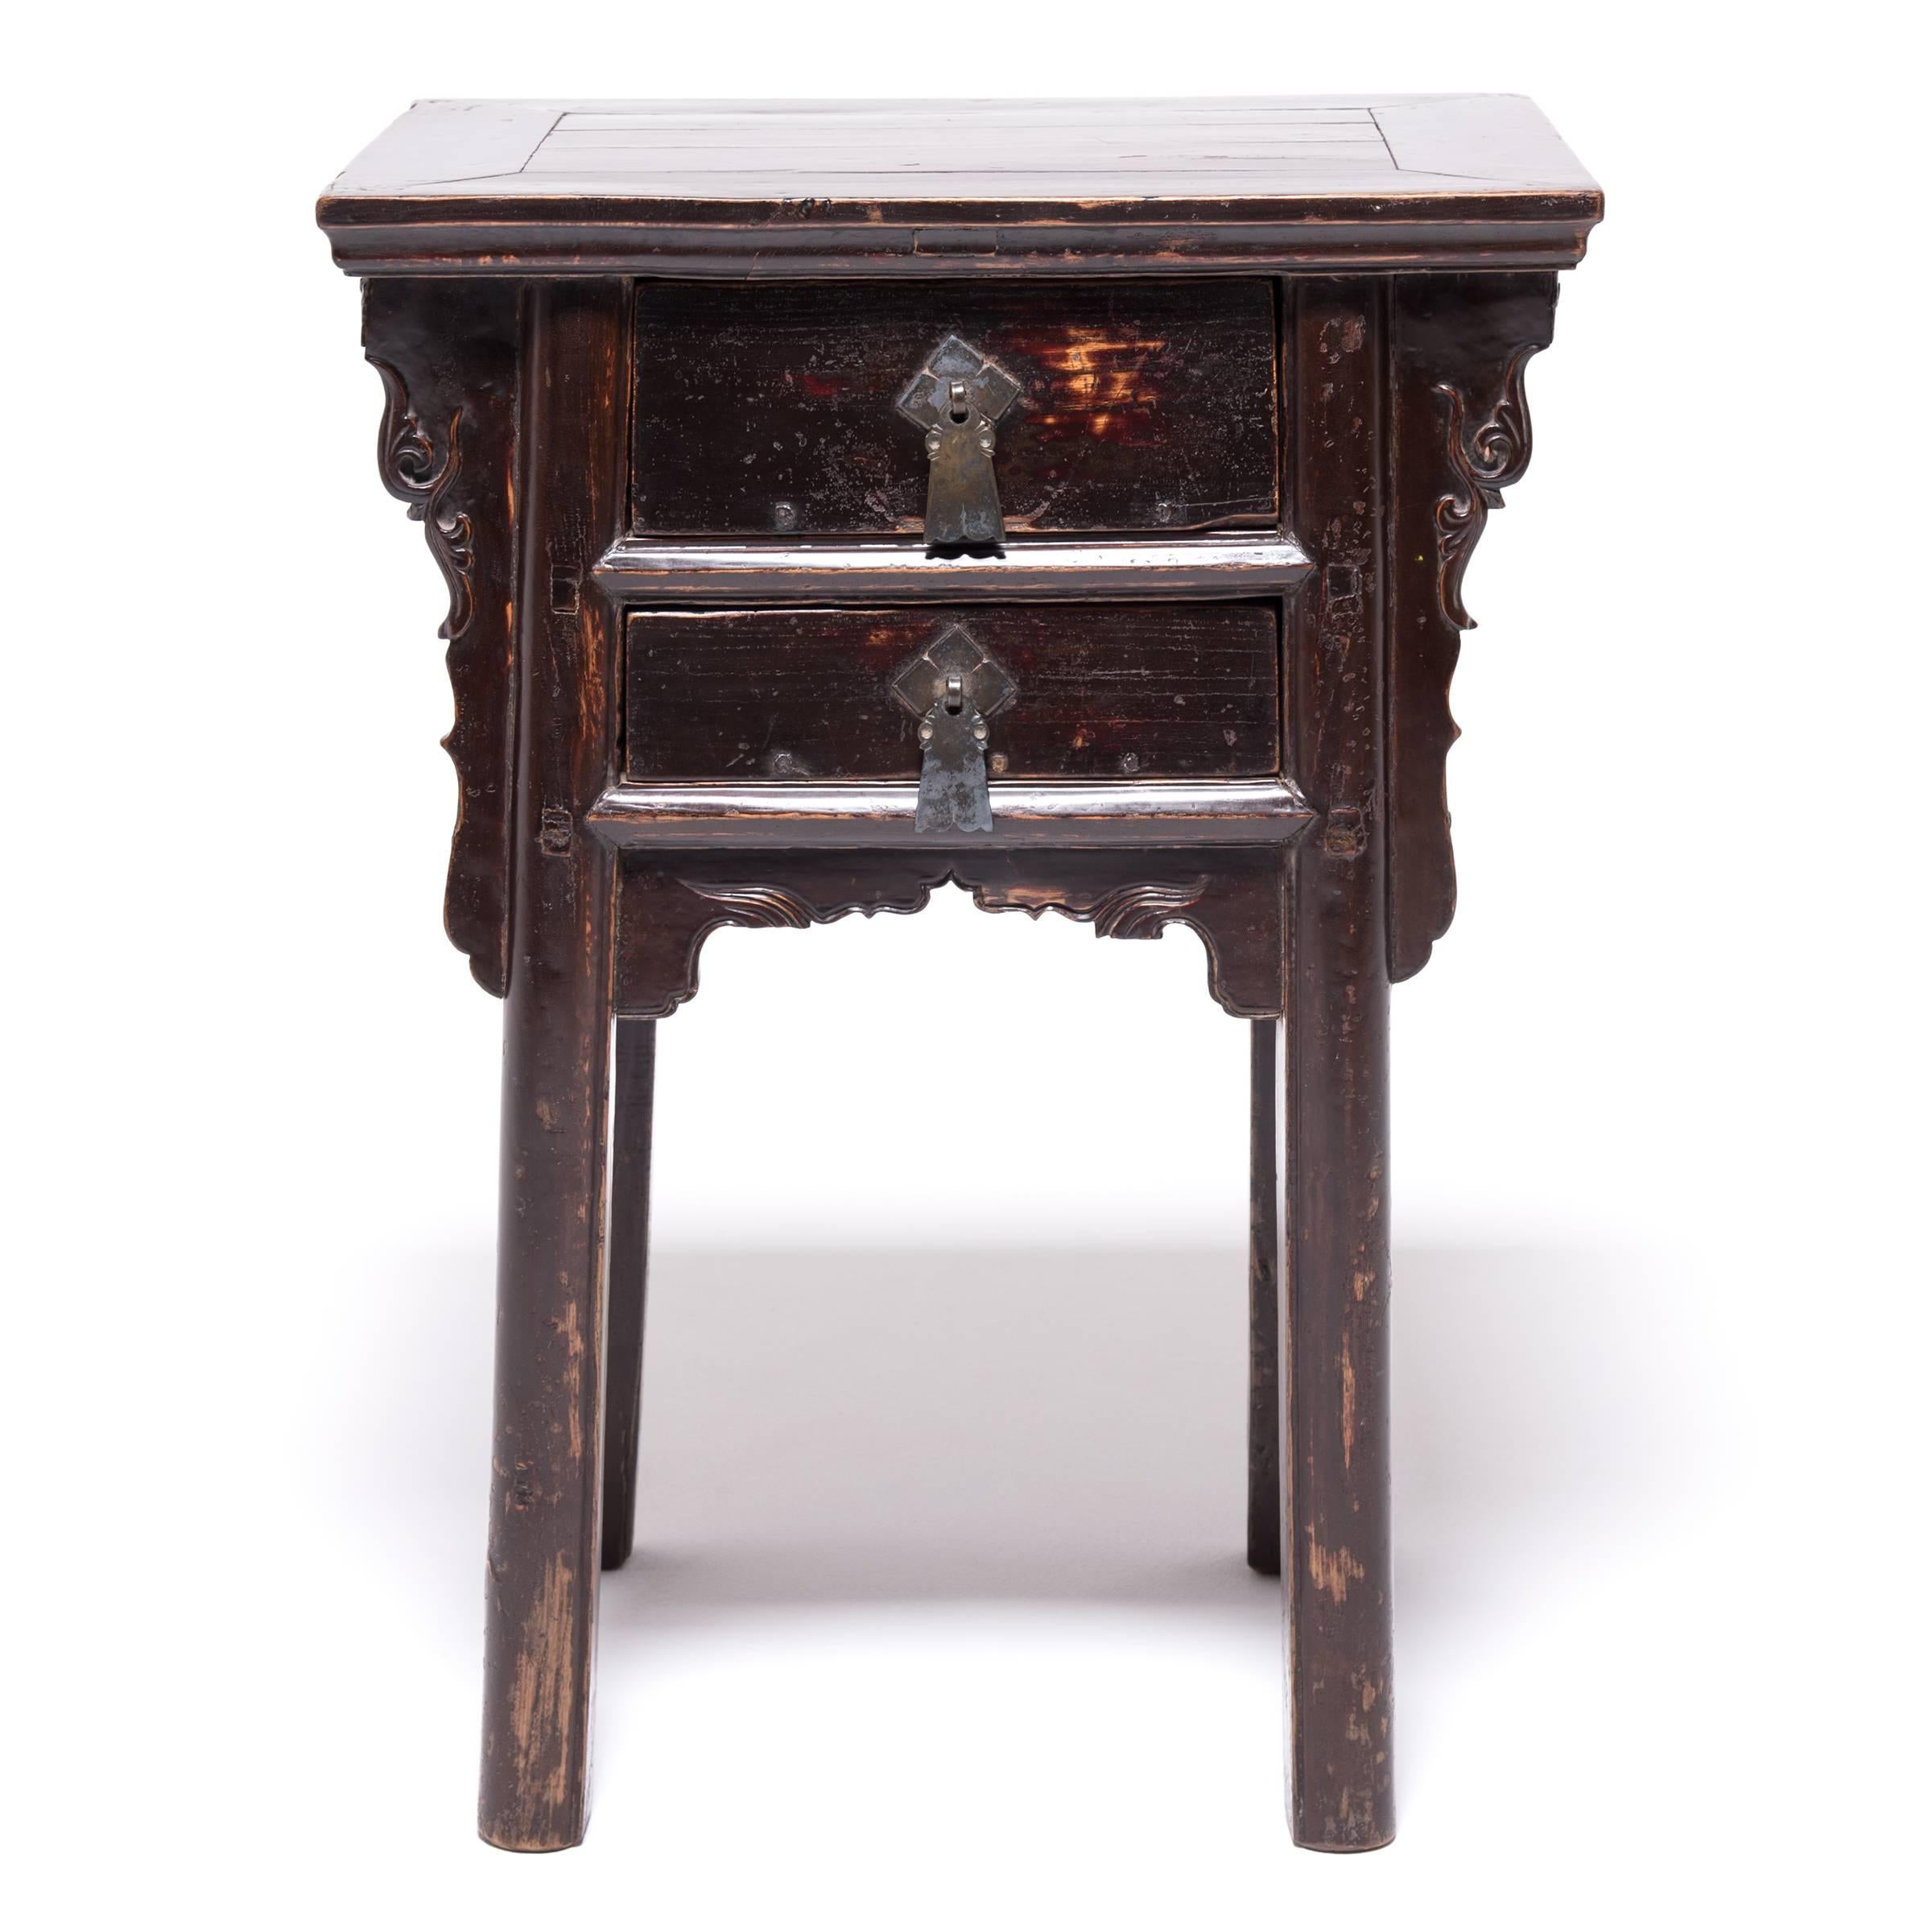 For over 150 years, through many turbulent years of Chinese history, this pair of petite cabinets has remained together. They are unusually configured with impressive original fittings, making them striking and collectible. Each was exquisitely